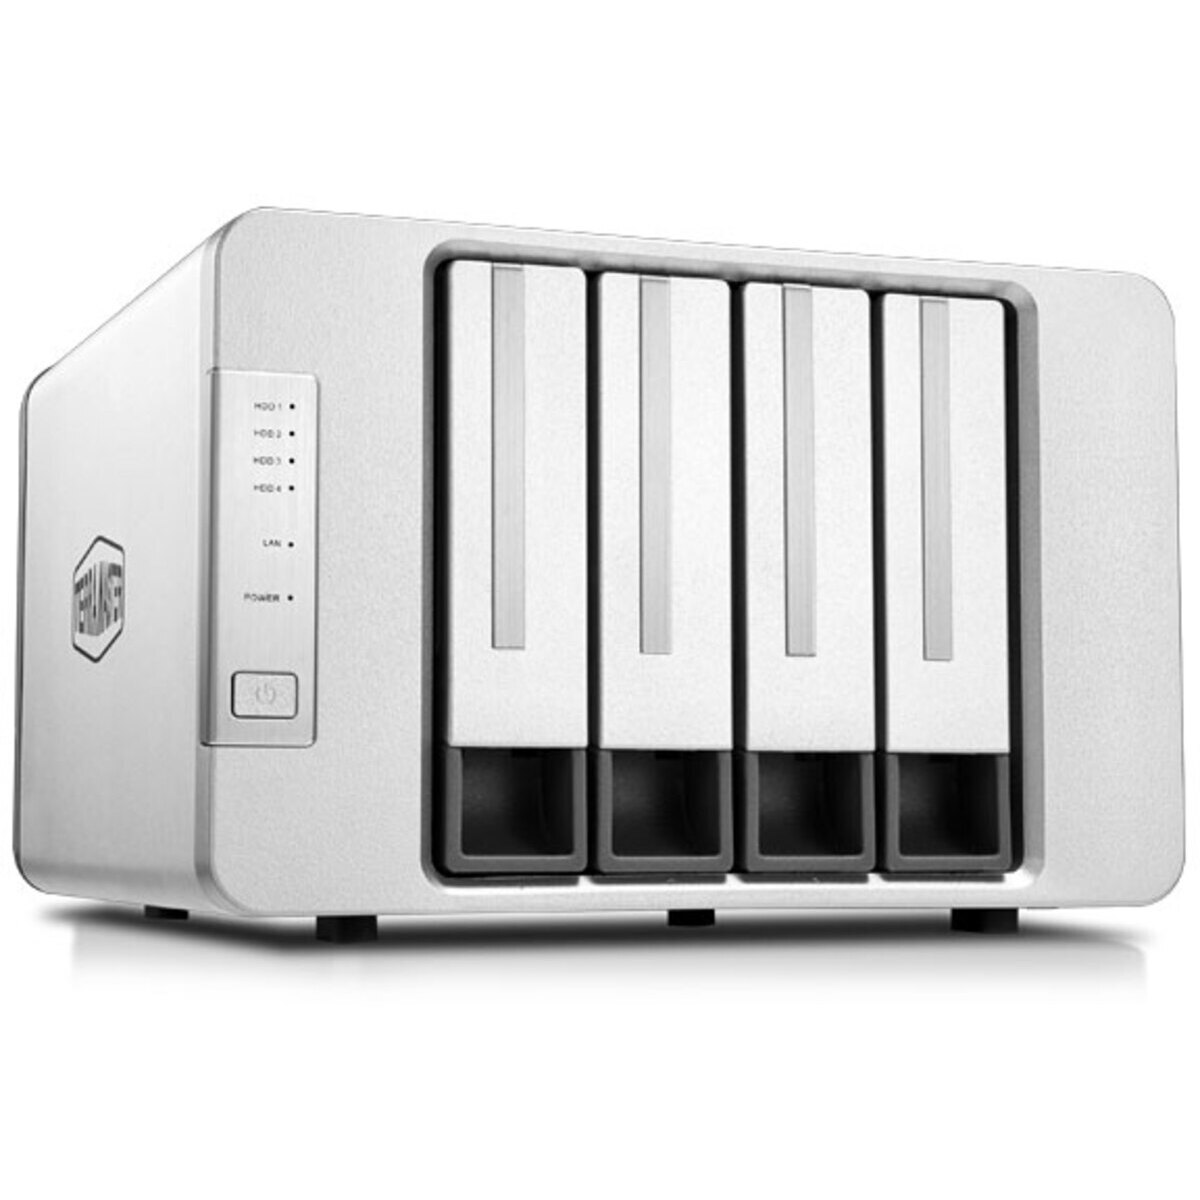 TerraMaster F4-223 66tb 4-Bay Desktop Personal / Basic Home / Small Office NAS - Network Attached Storage Device 3x22tb Western Digital Ultrastar HC570 WUH722222ALE6L4 3.5 7200rpm SATA 6Gb/s HDD ENTERPRISE Class Drives Installed - Burn-In Tested - FREE RAM UPGRADE F4-223